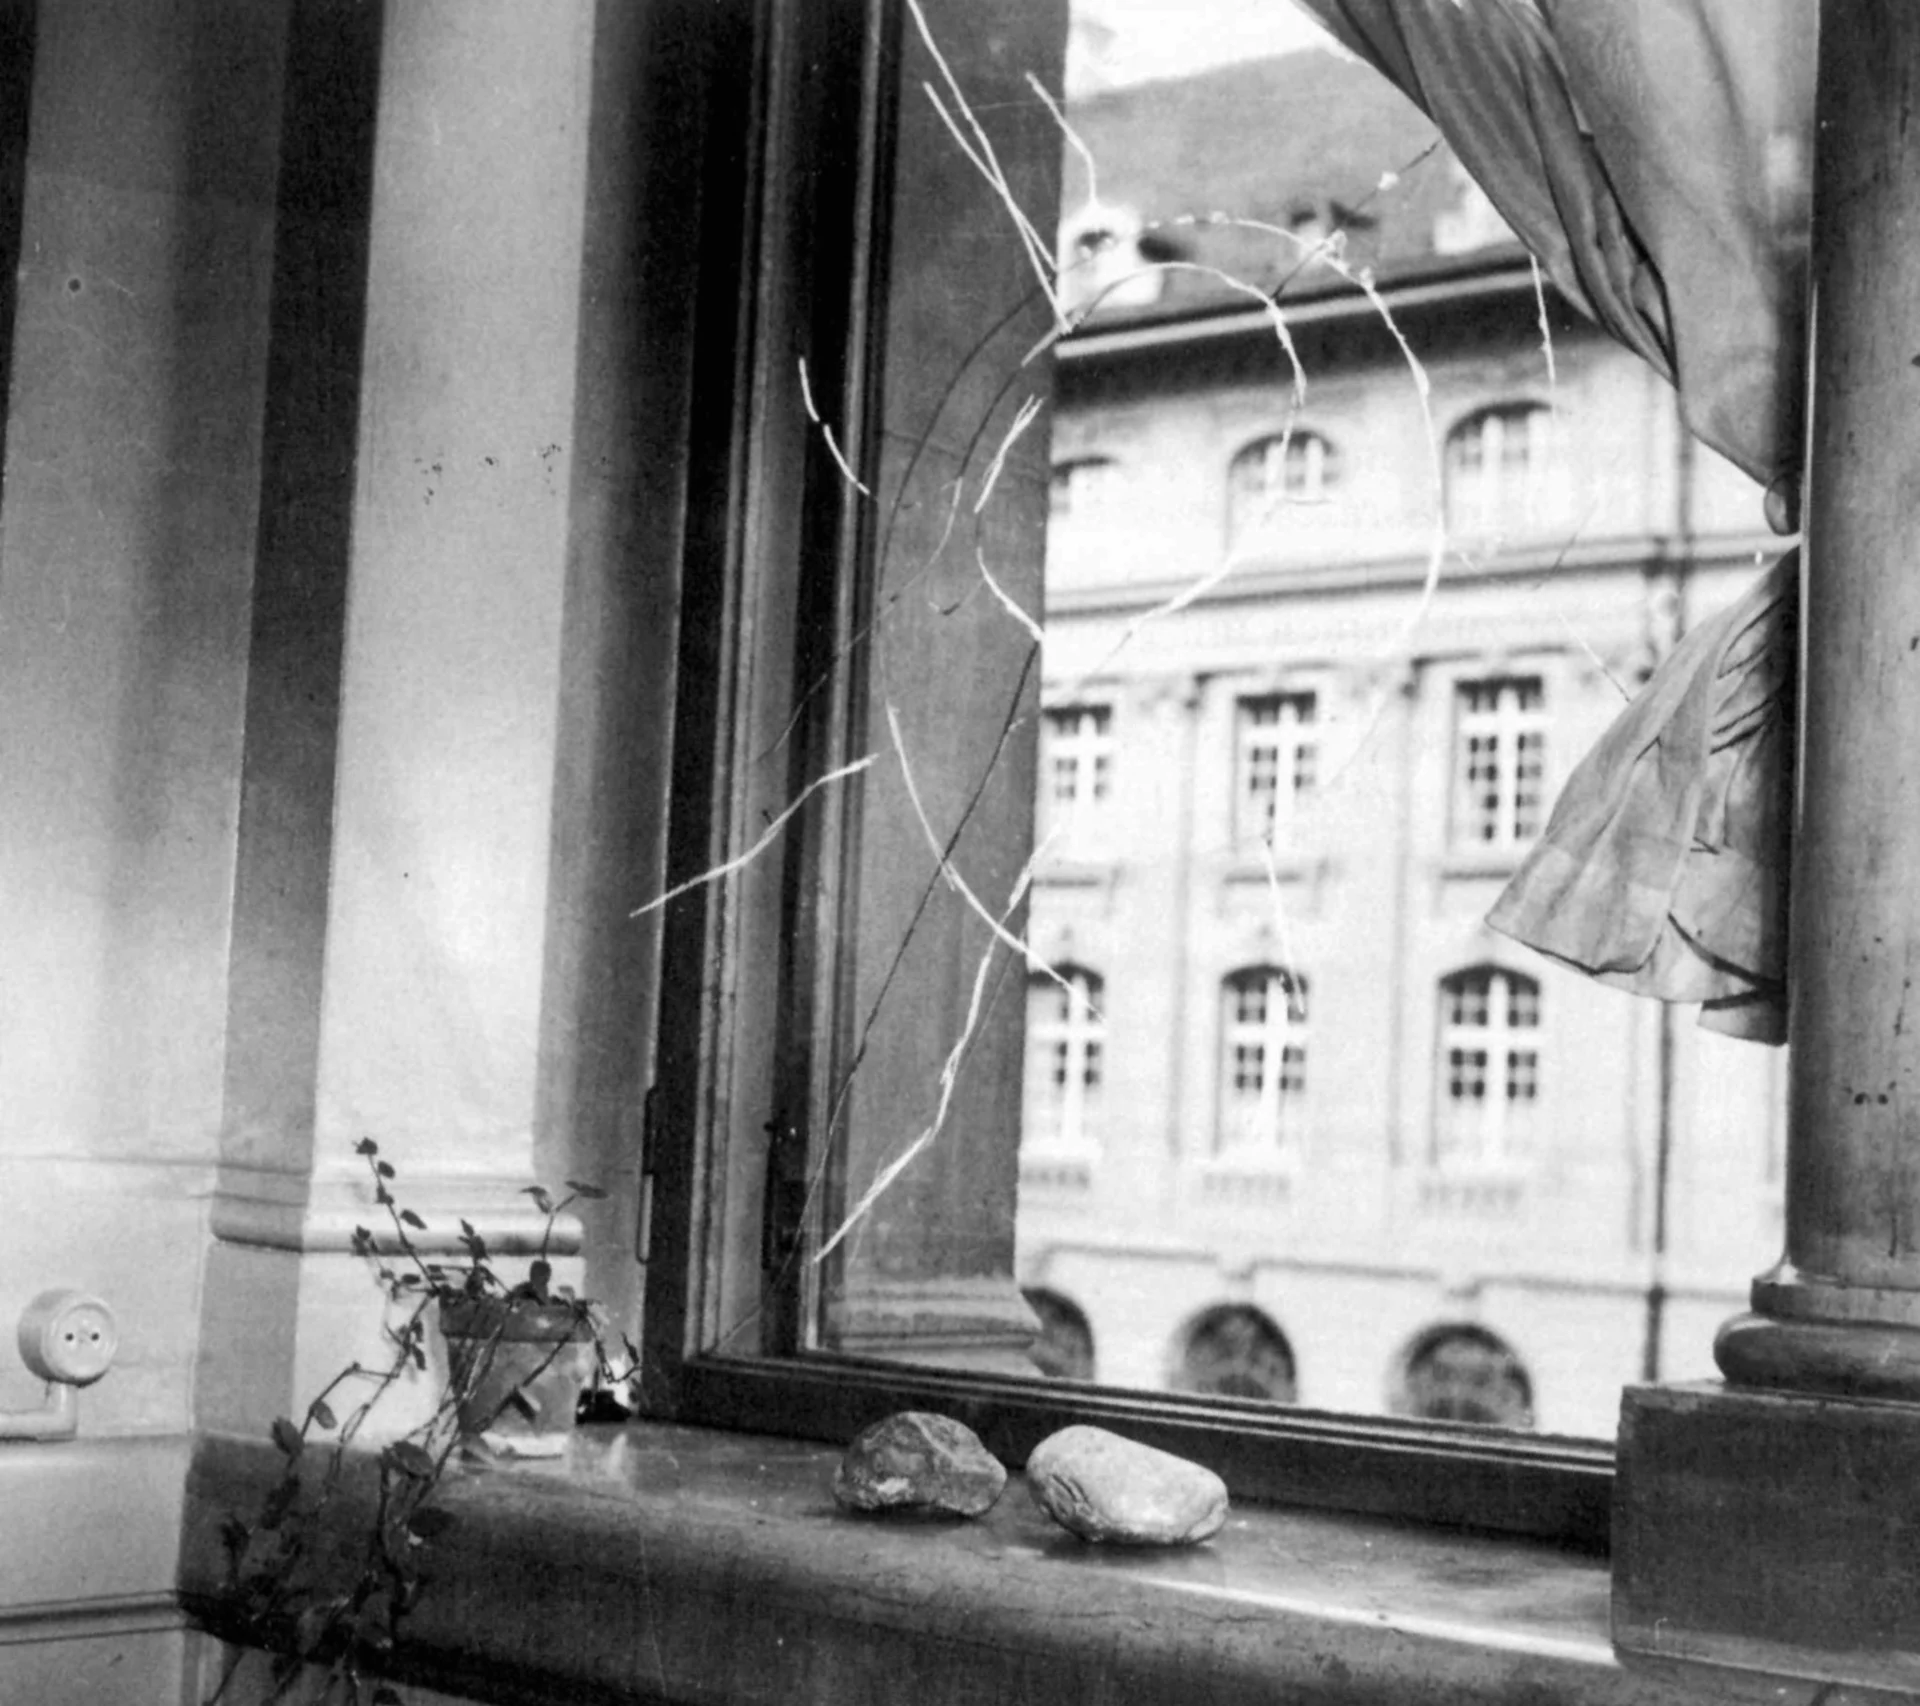 A broken window with a stone on the windowsill.